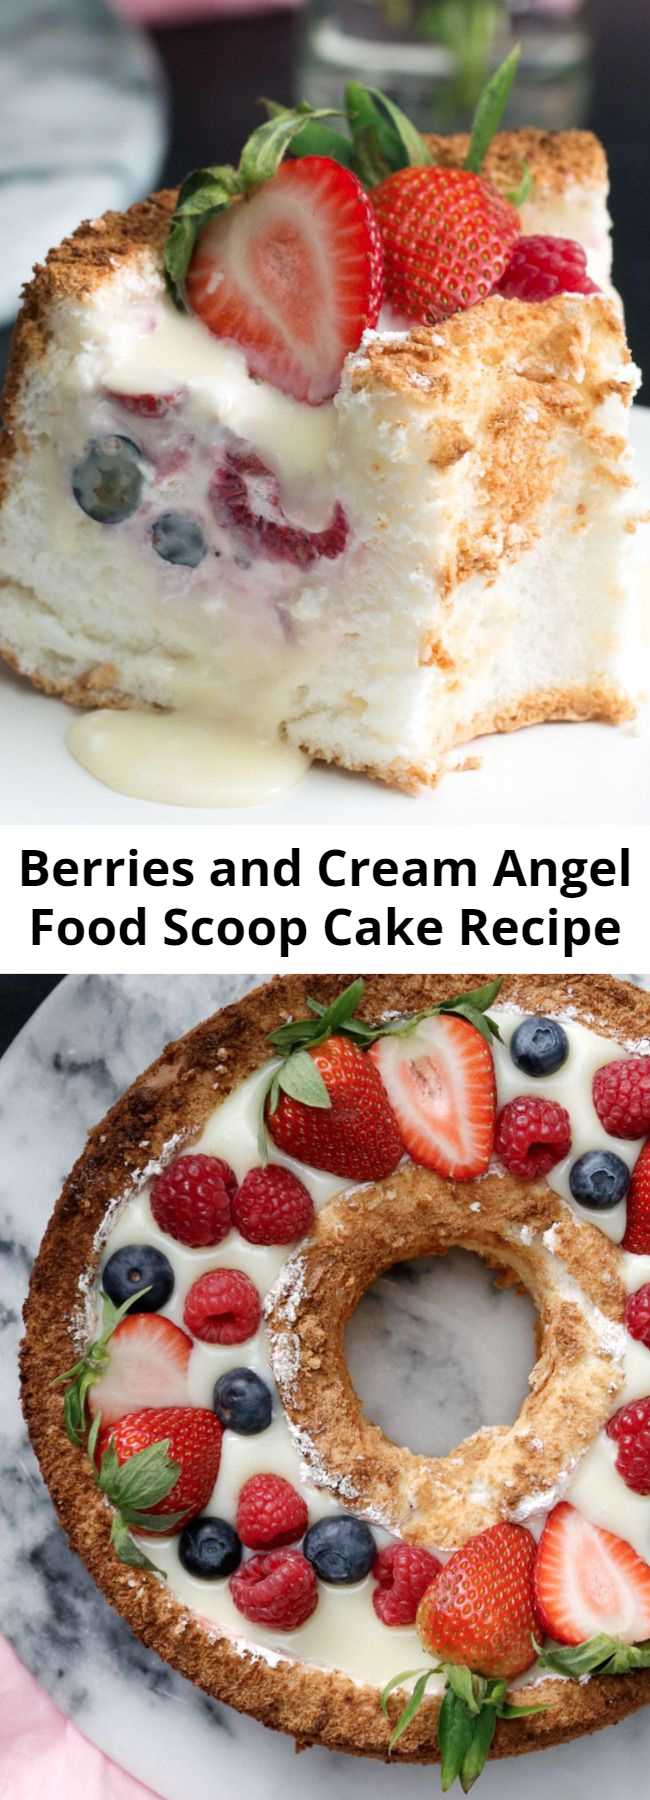 Berries and Cream Angel Food Scoop Cake Recipe - Cake is for life, not just birthdays.